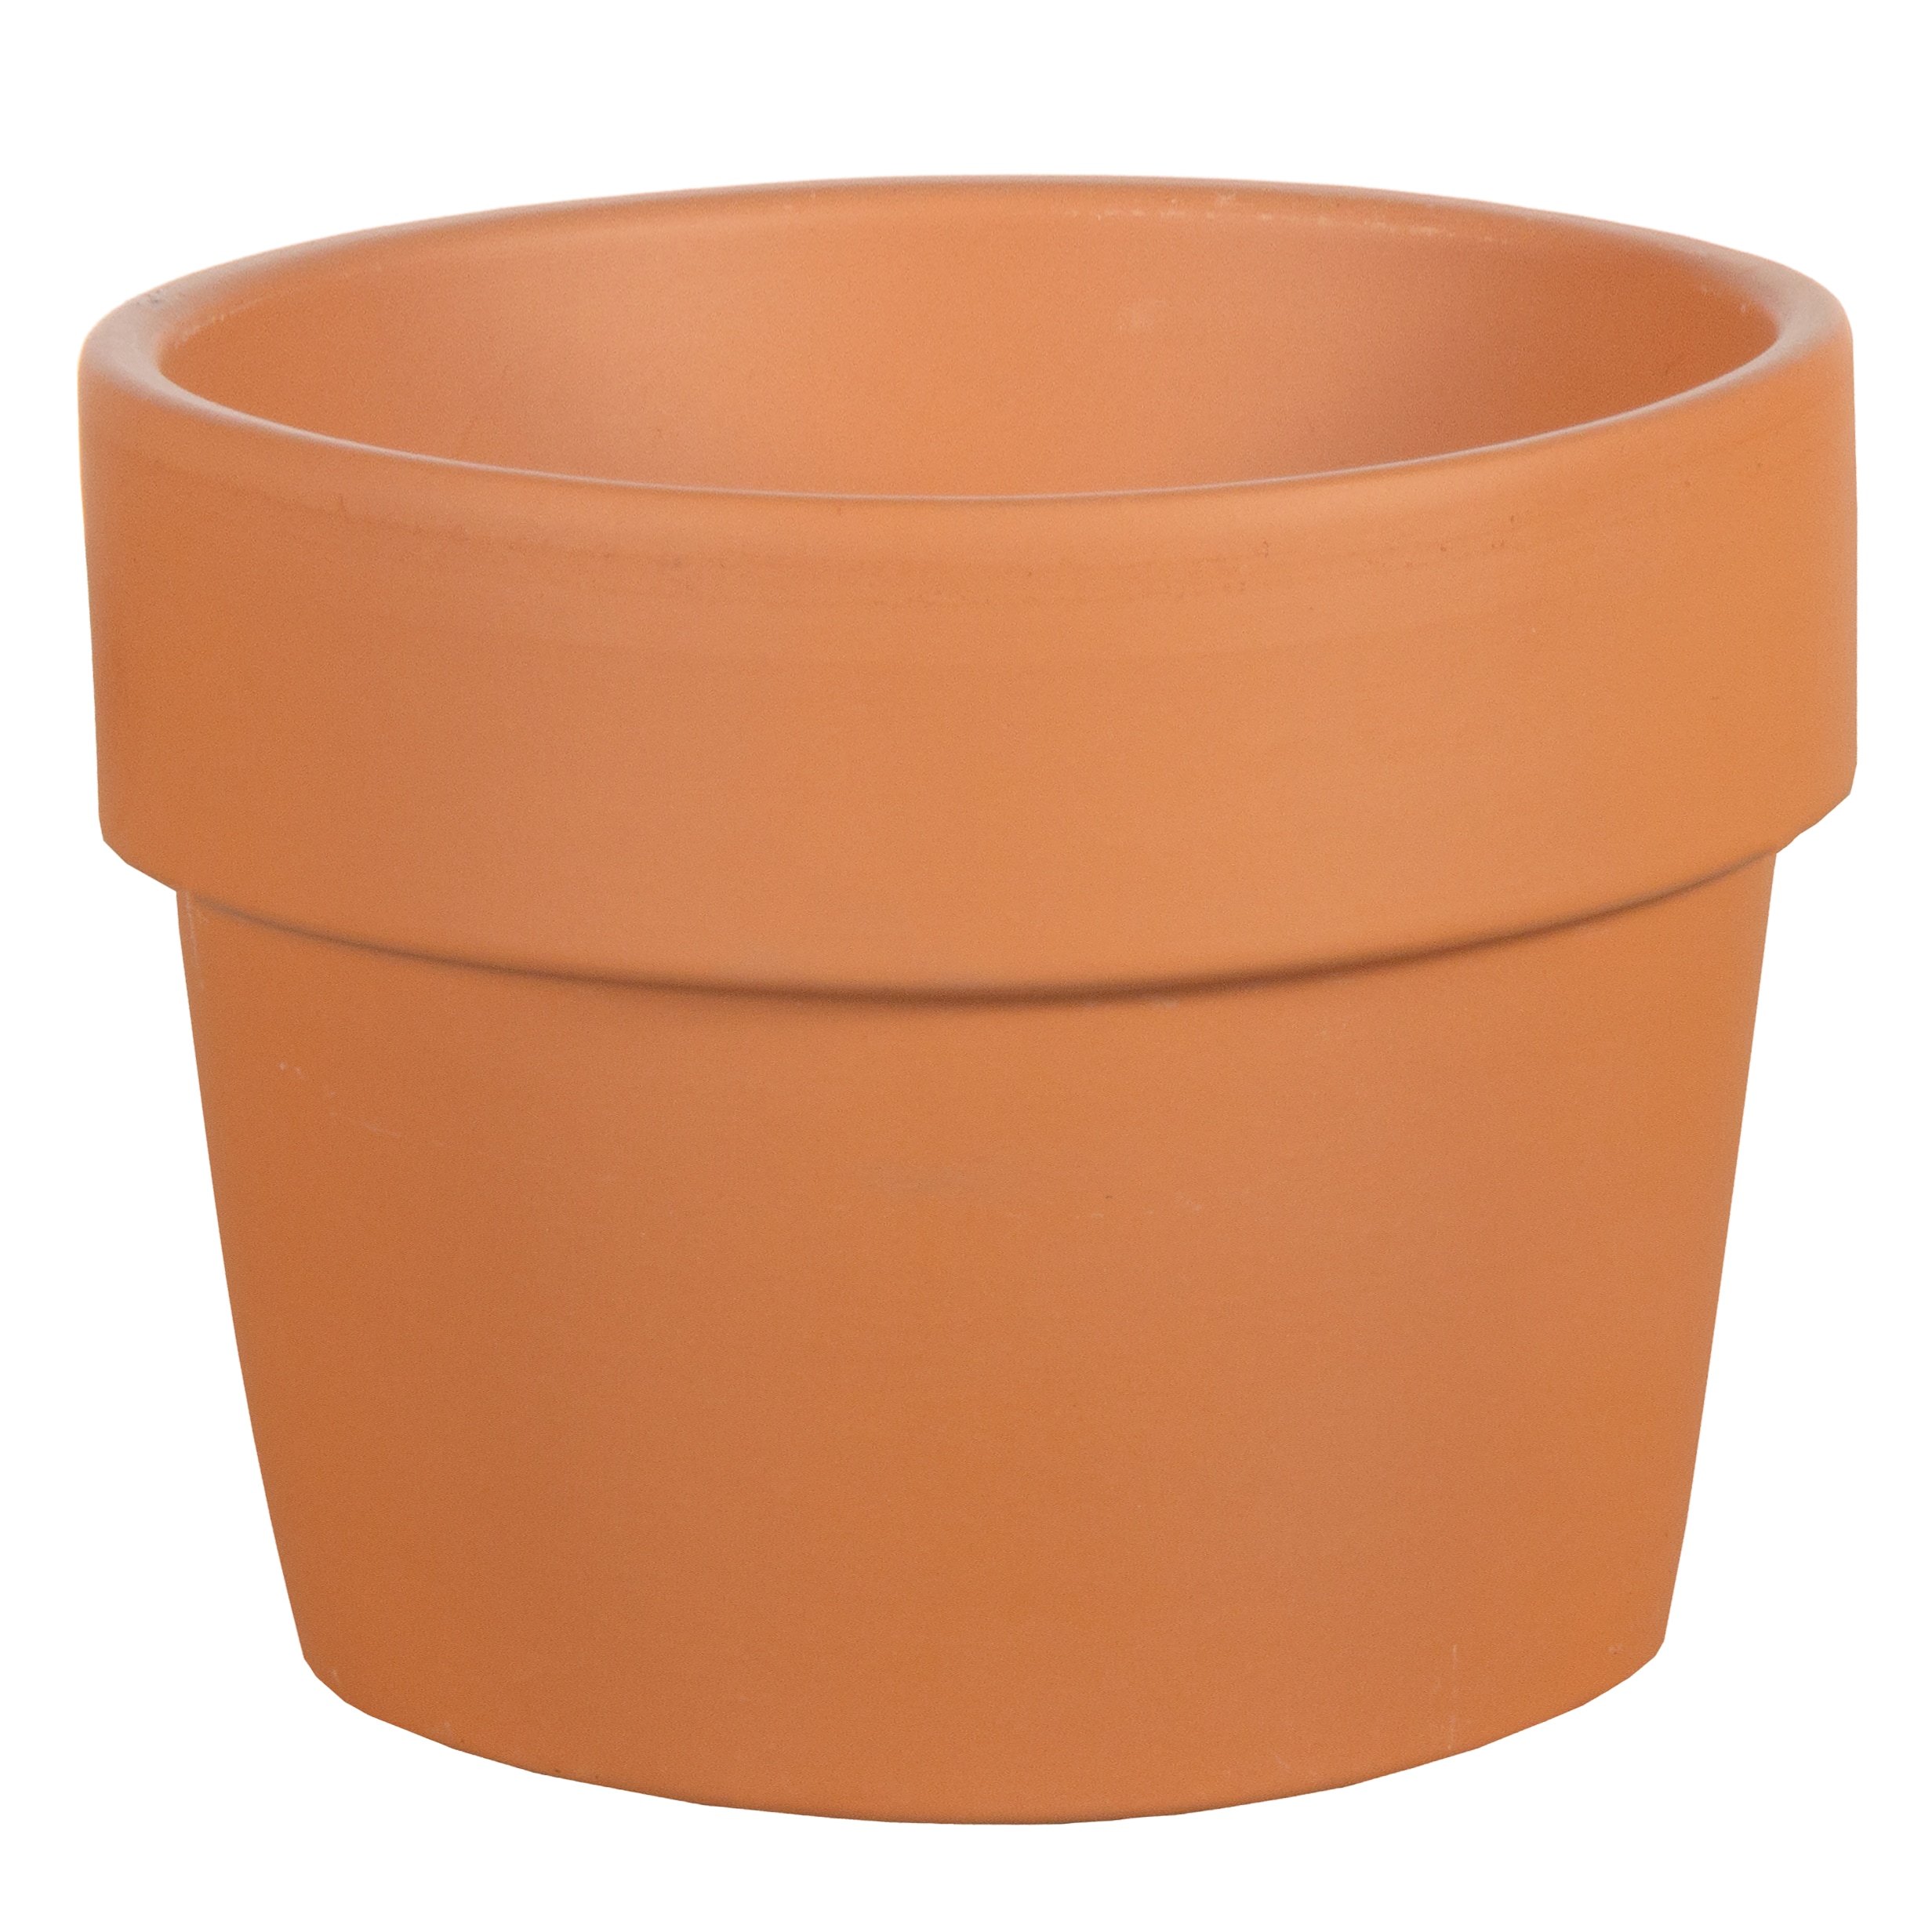 The Stand of 5-in W x H Terracotta Clay Indoor/Outdoor Planter at